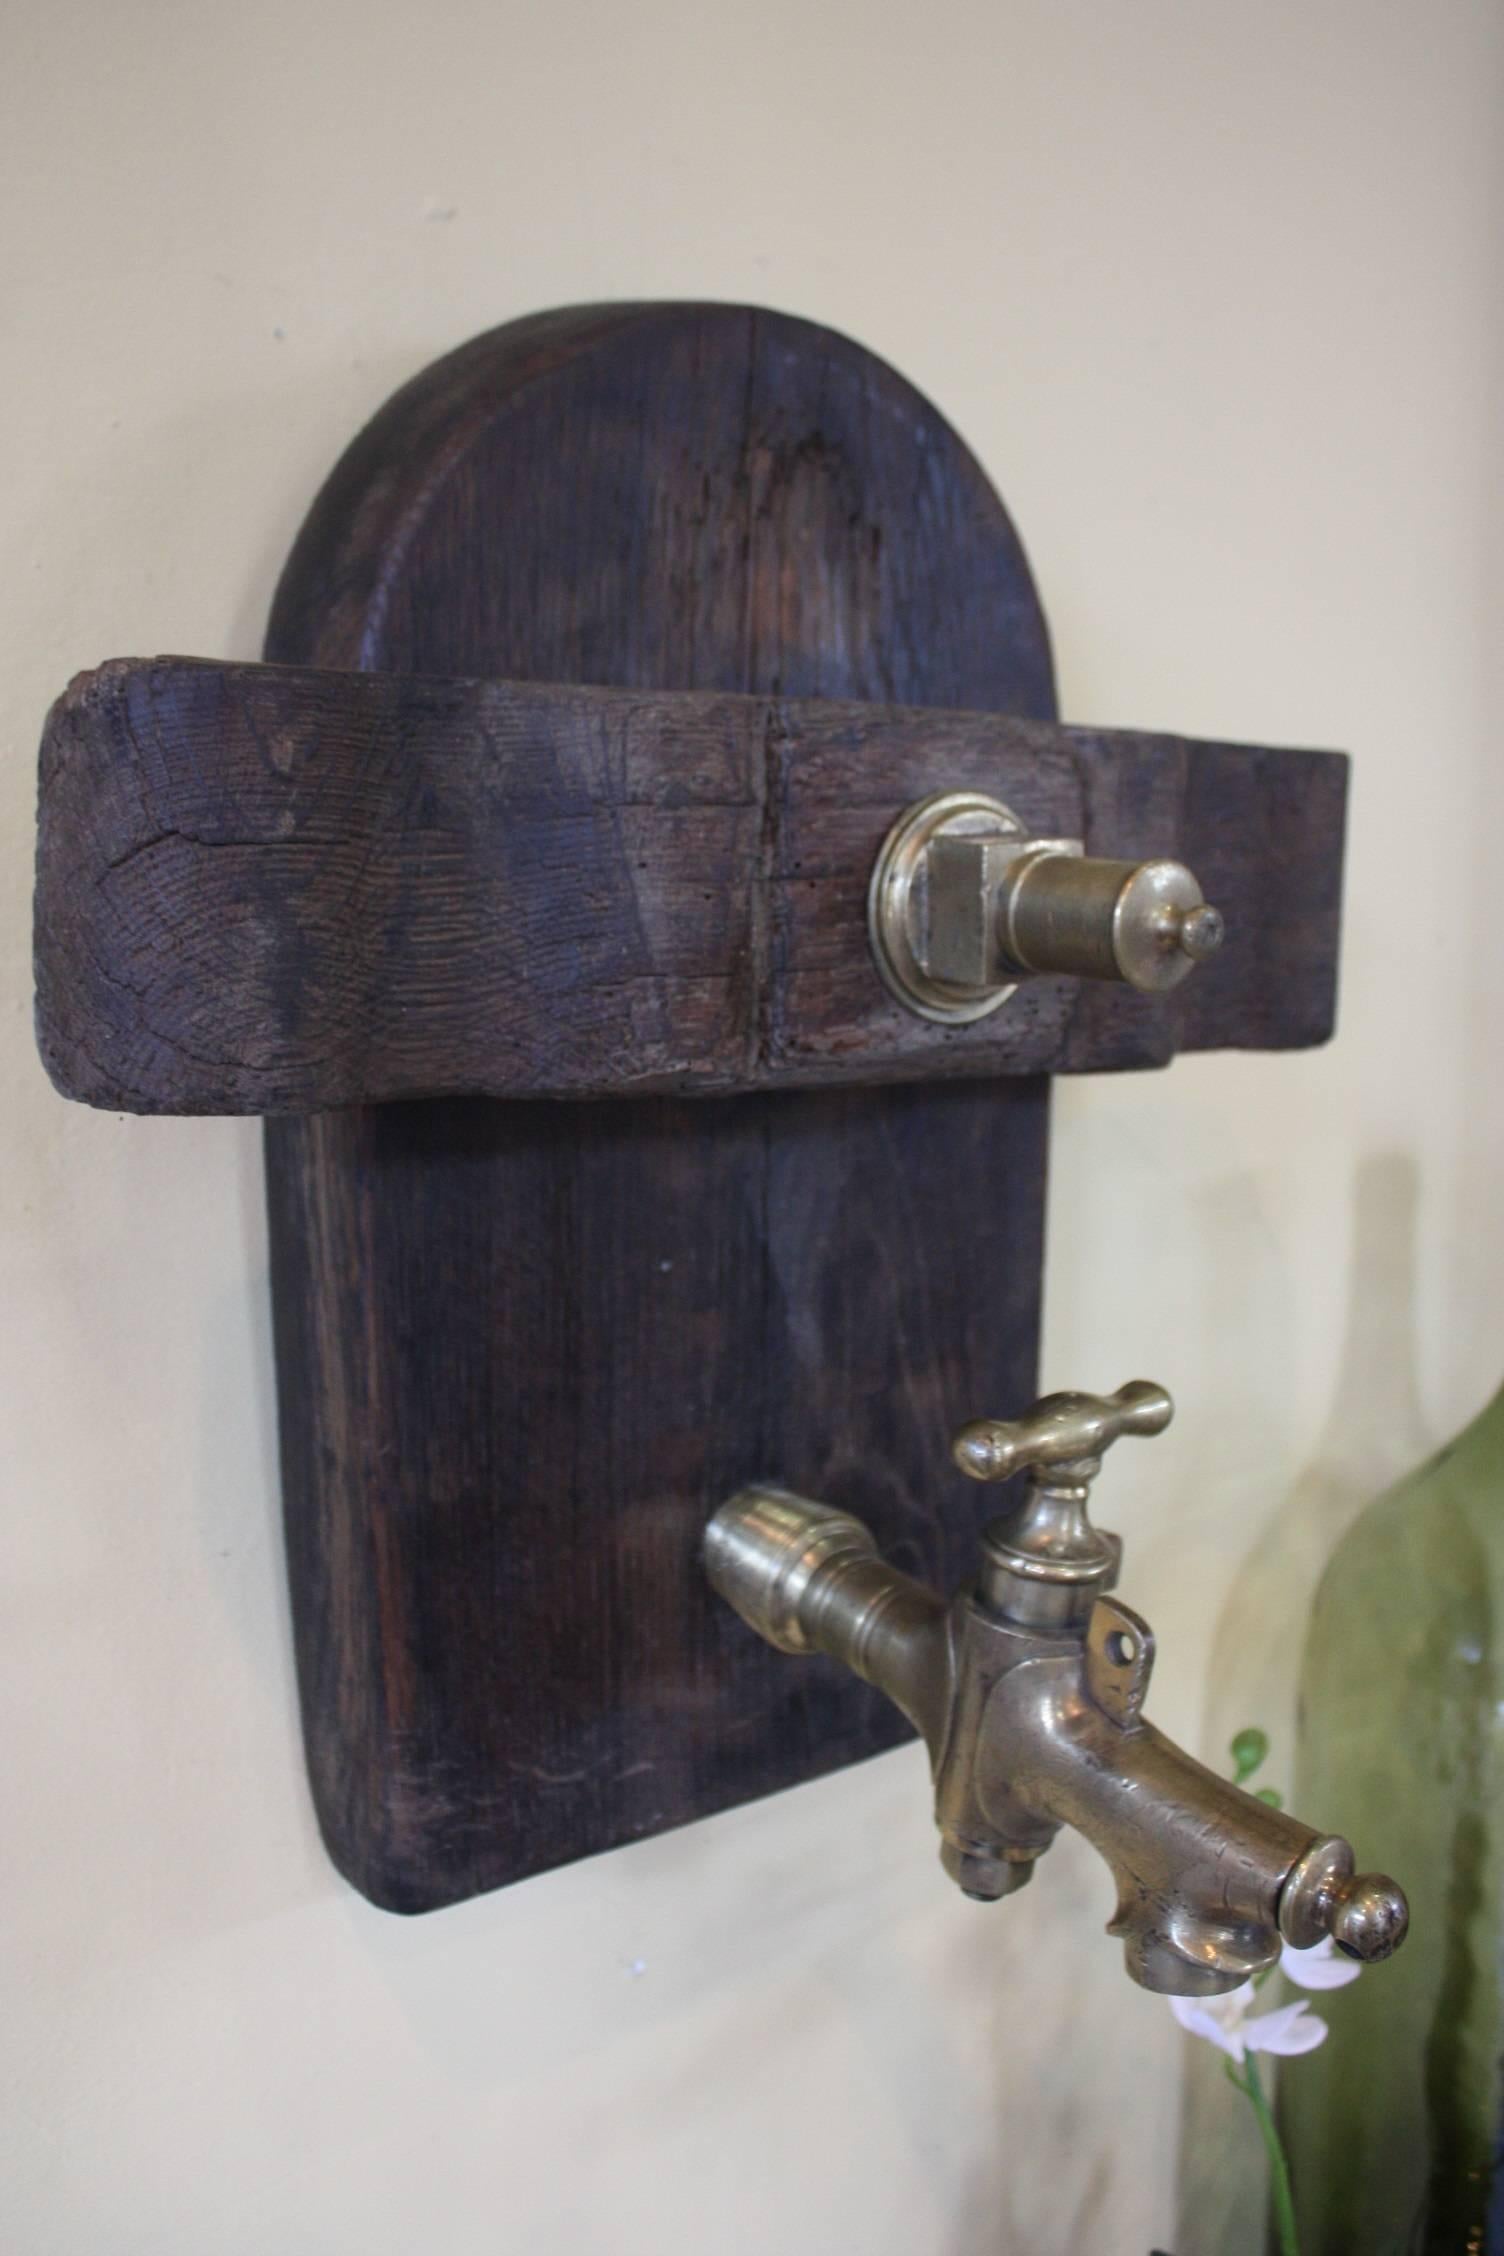 French wine barrel door with bronze spout. Makes a really good conversation piece and would look great hanging in a wine cellar.